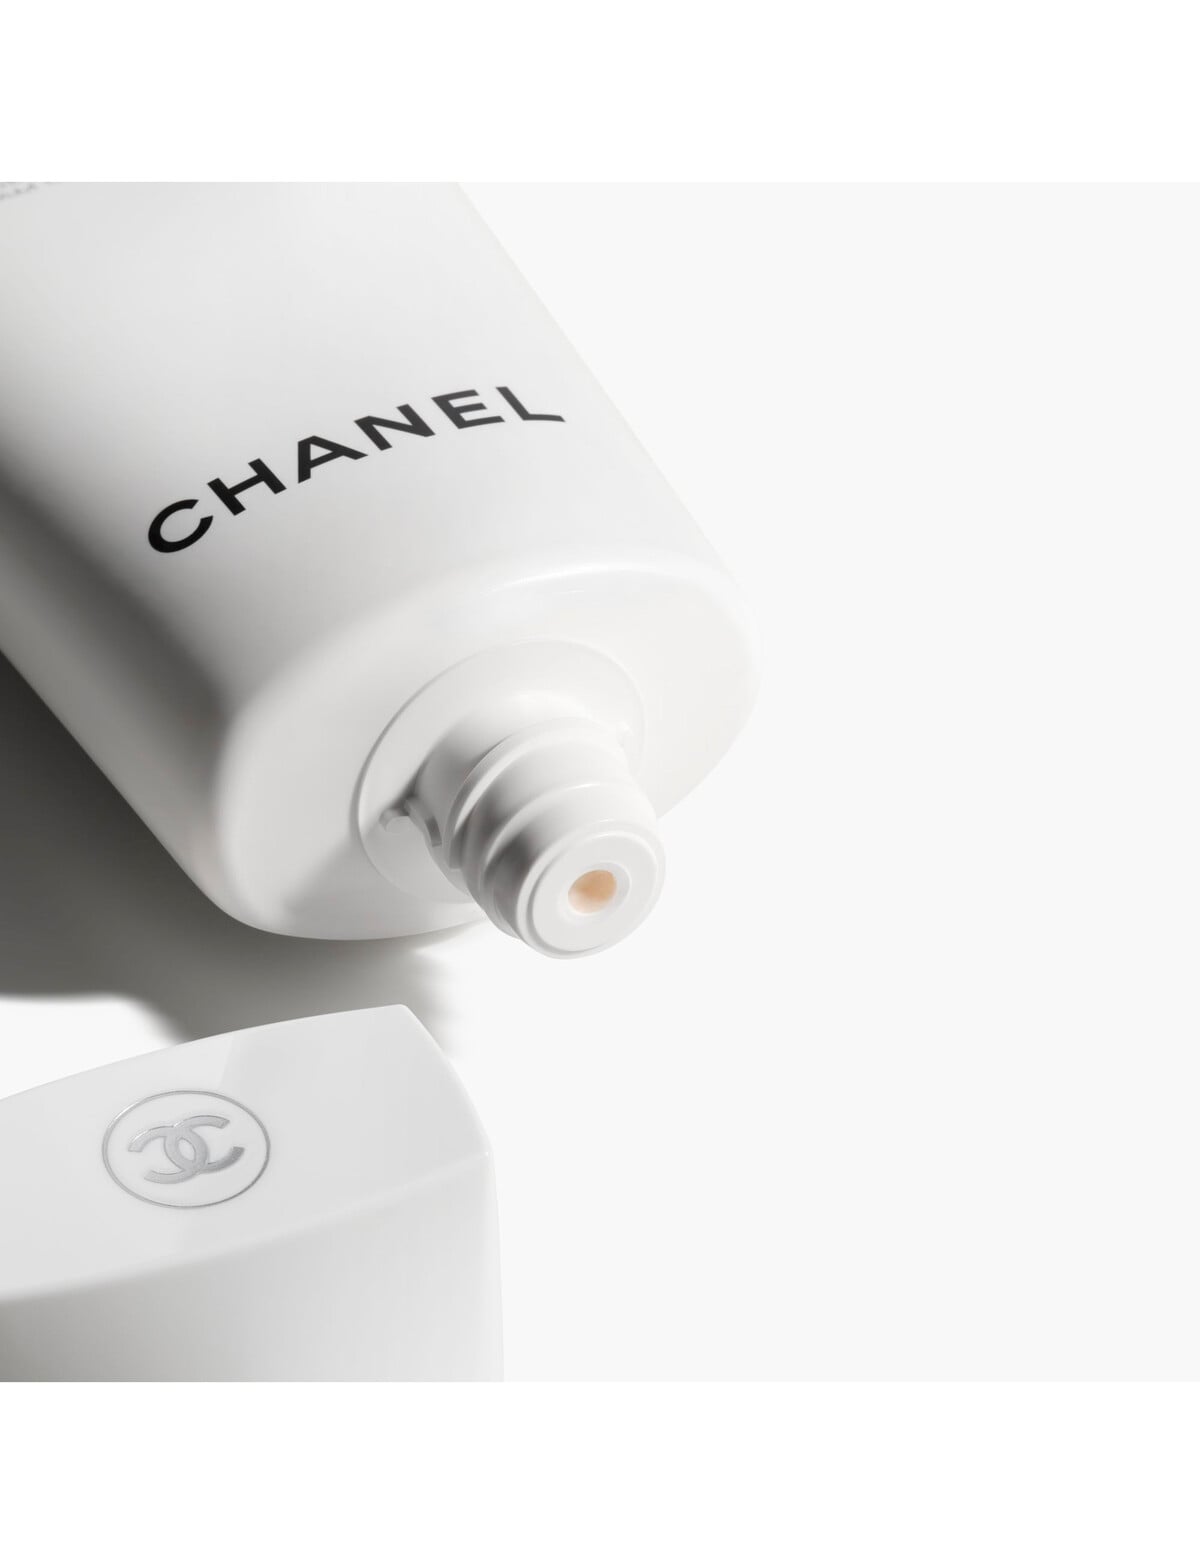 CHANEL LE BLANC FOAM CLEANSER Intense Brightening Foam Cleanser 150ml -  CLEANSERS & MAKEUP REMOVERS